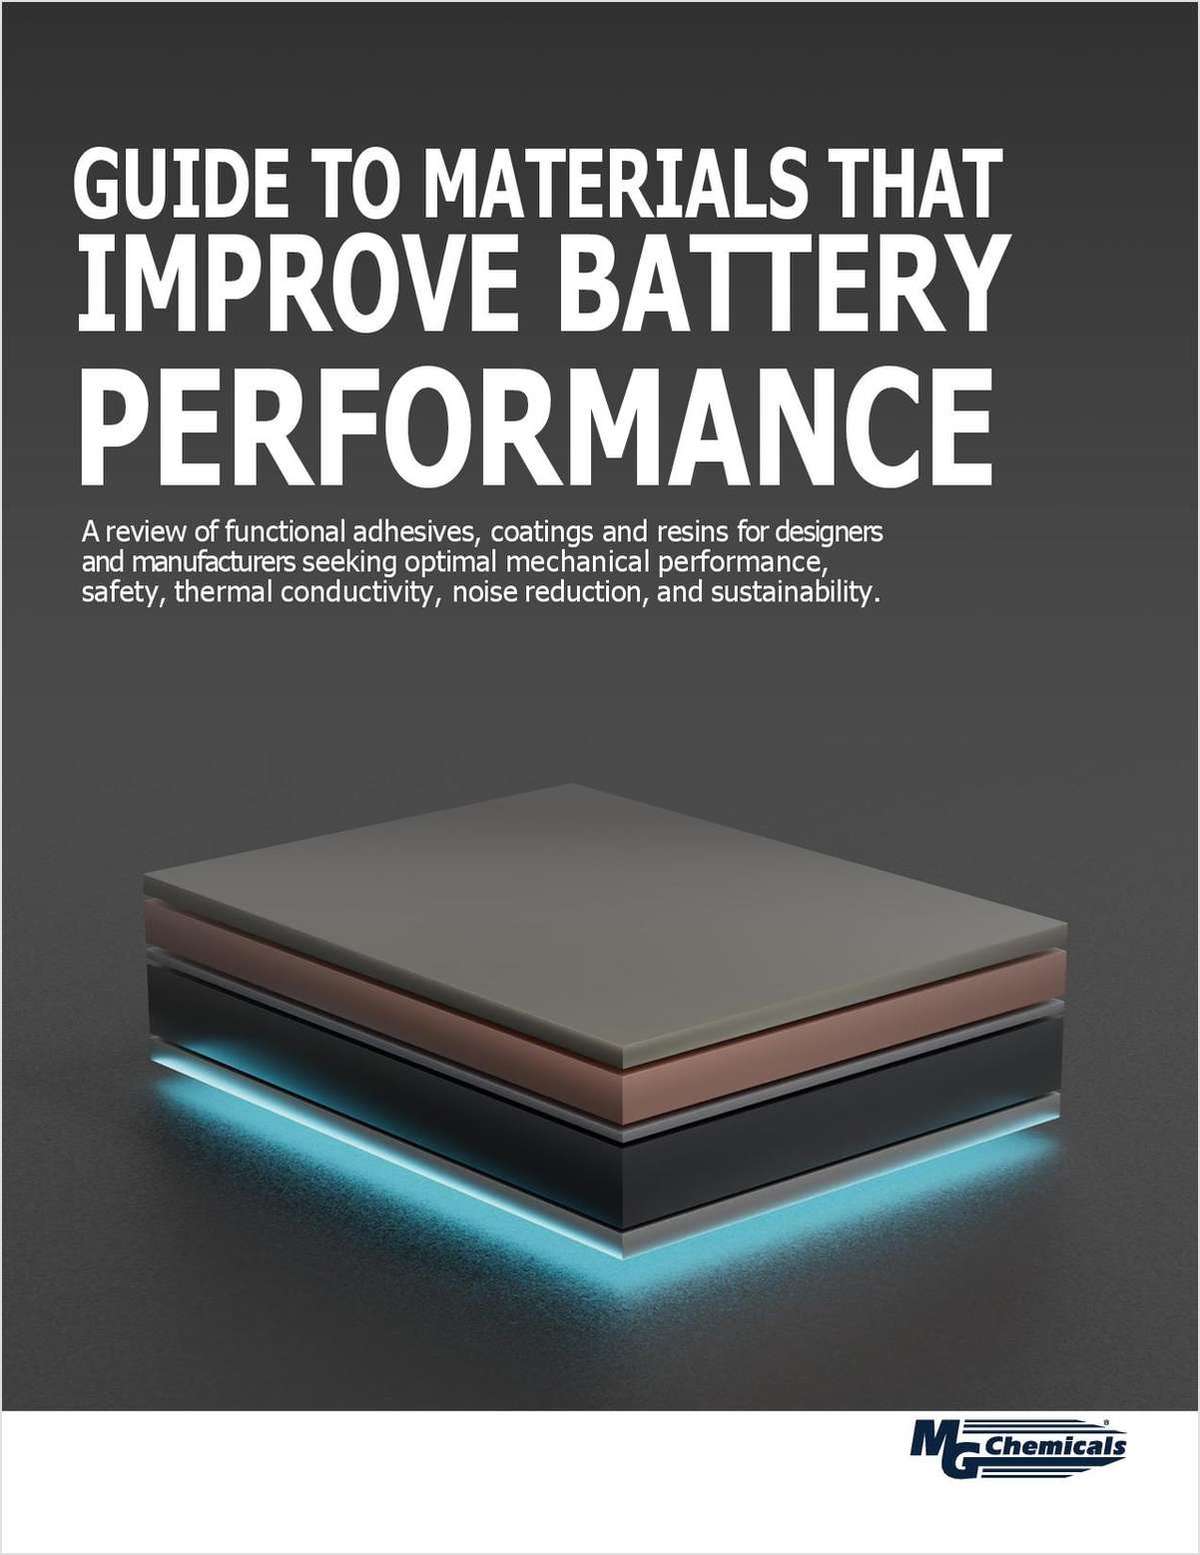 Guide to Materials that Improve Battery Performance